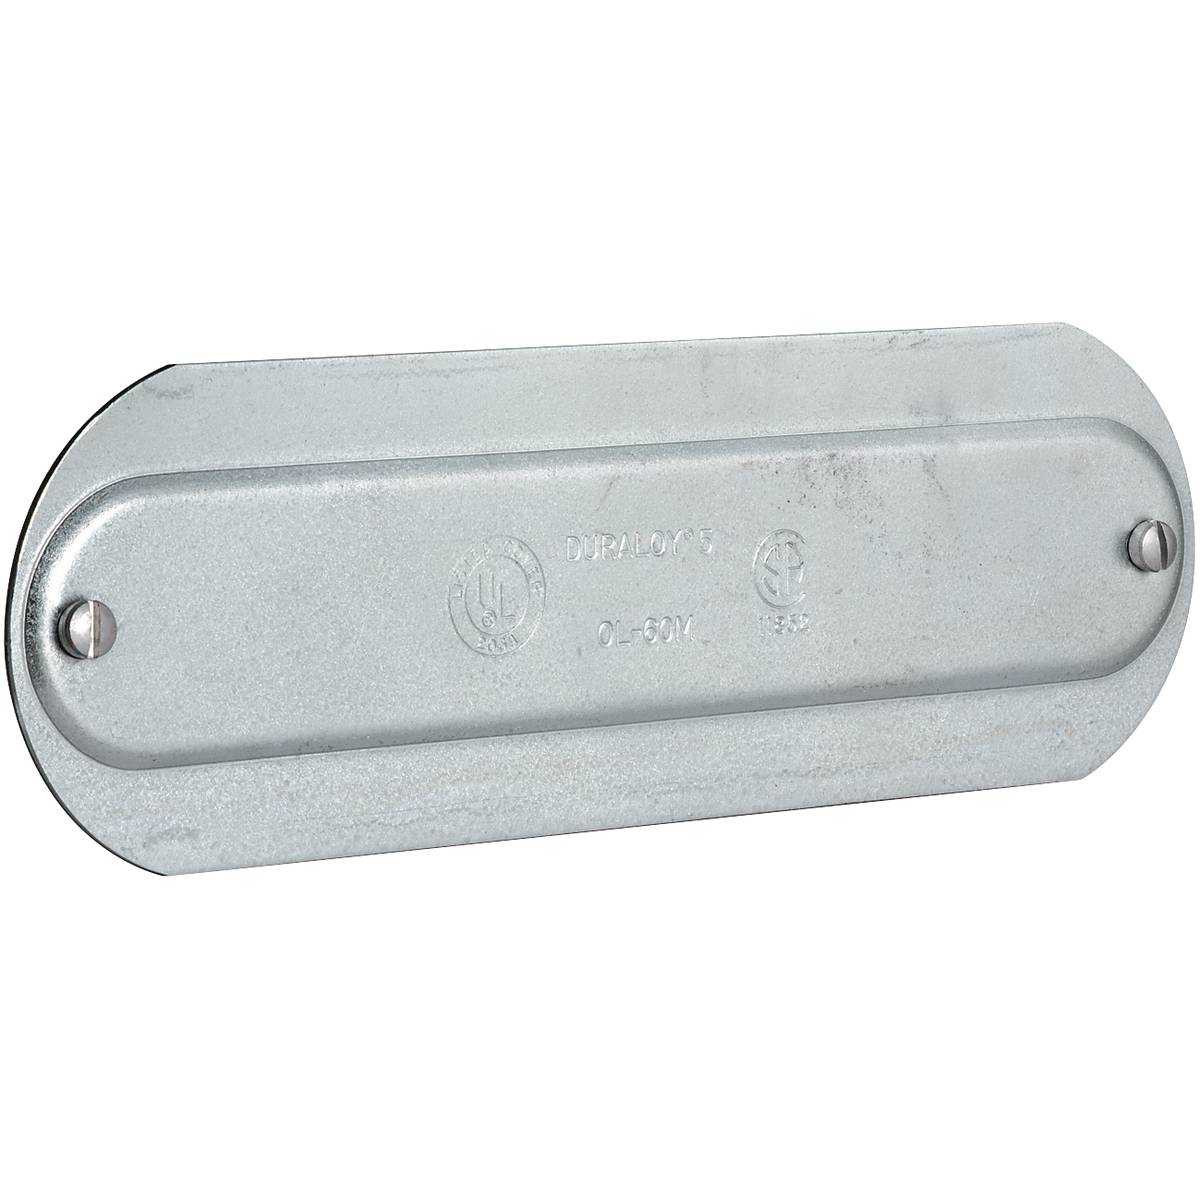 Killark® OL-30 Stamped Conduit Body Cover, 1 in Hub, For Use With O Series/Duraloy® 5 Fitting, Aluminum, Natural